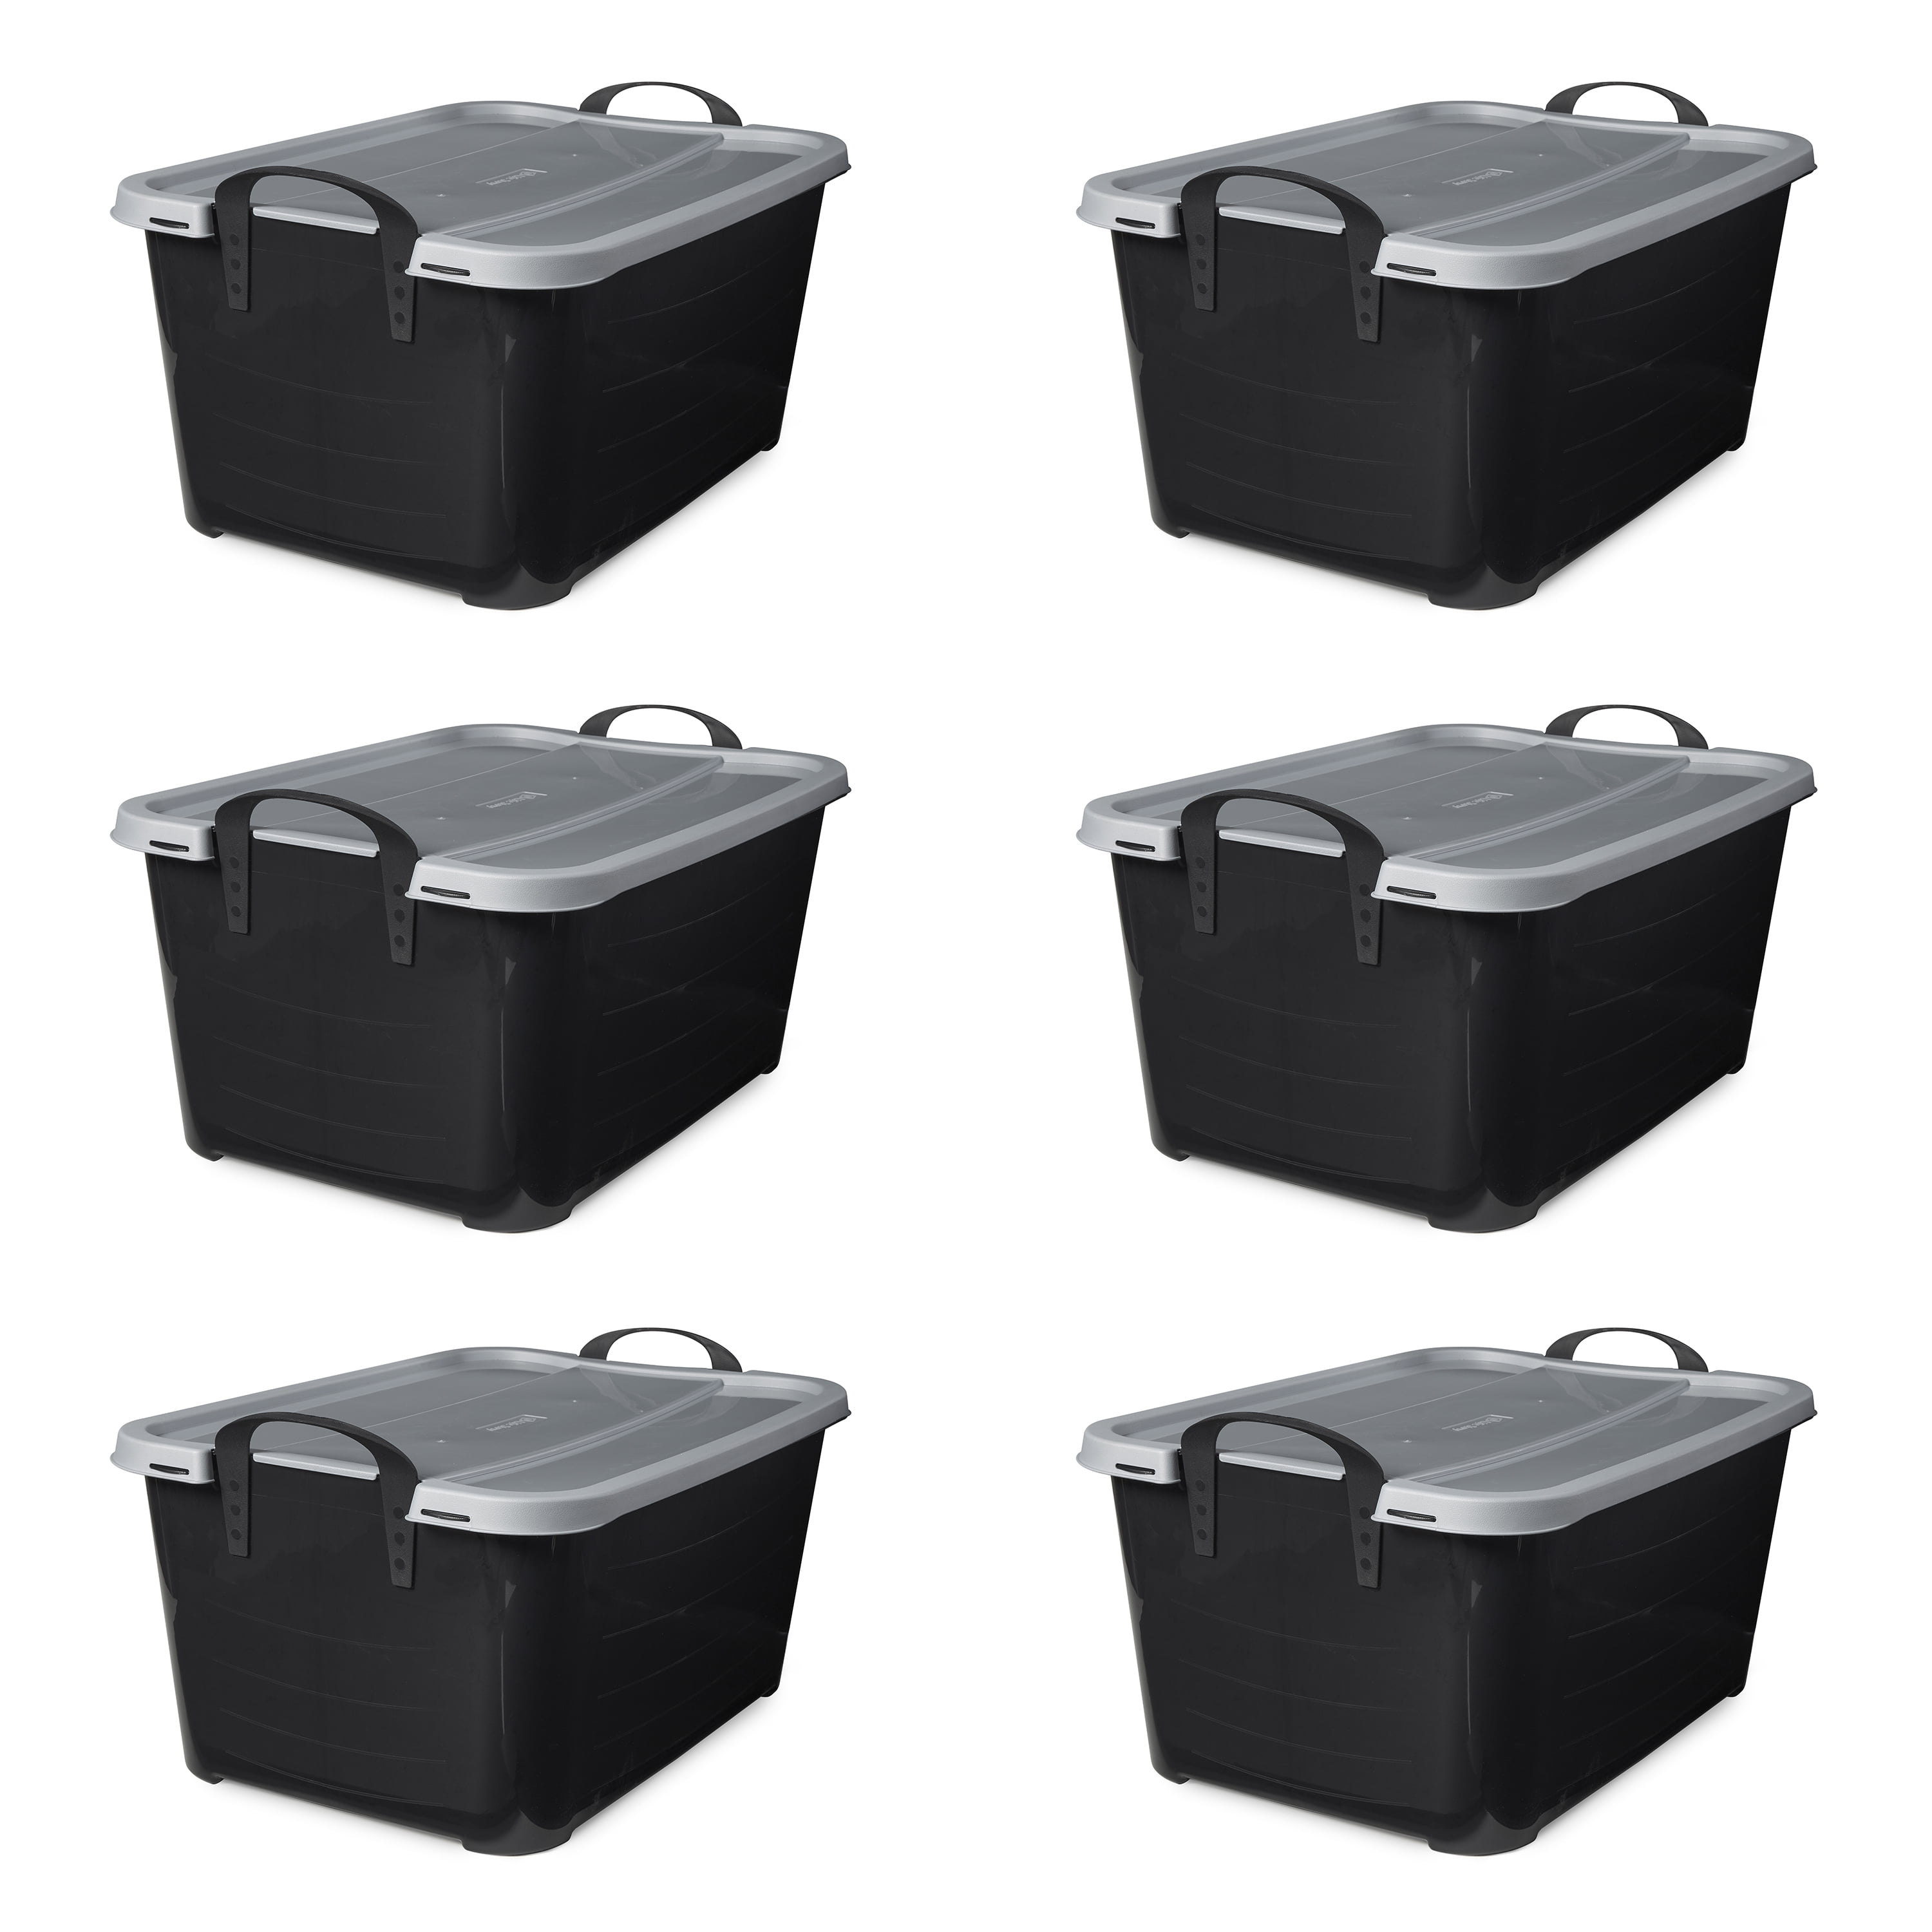 Life Story Clear 6-Quart Storage Box with Gray Snap Lids, 6-Pack